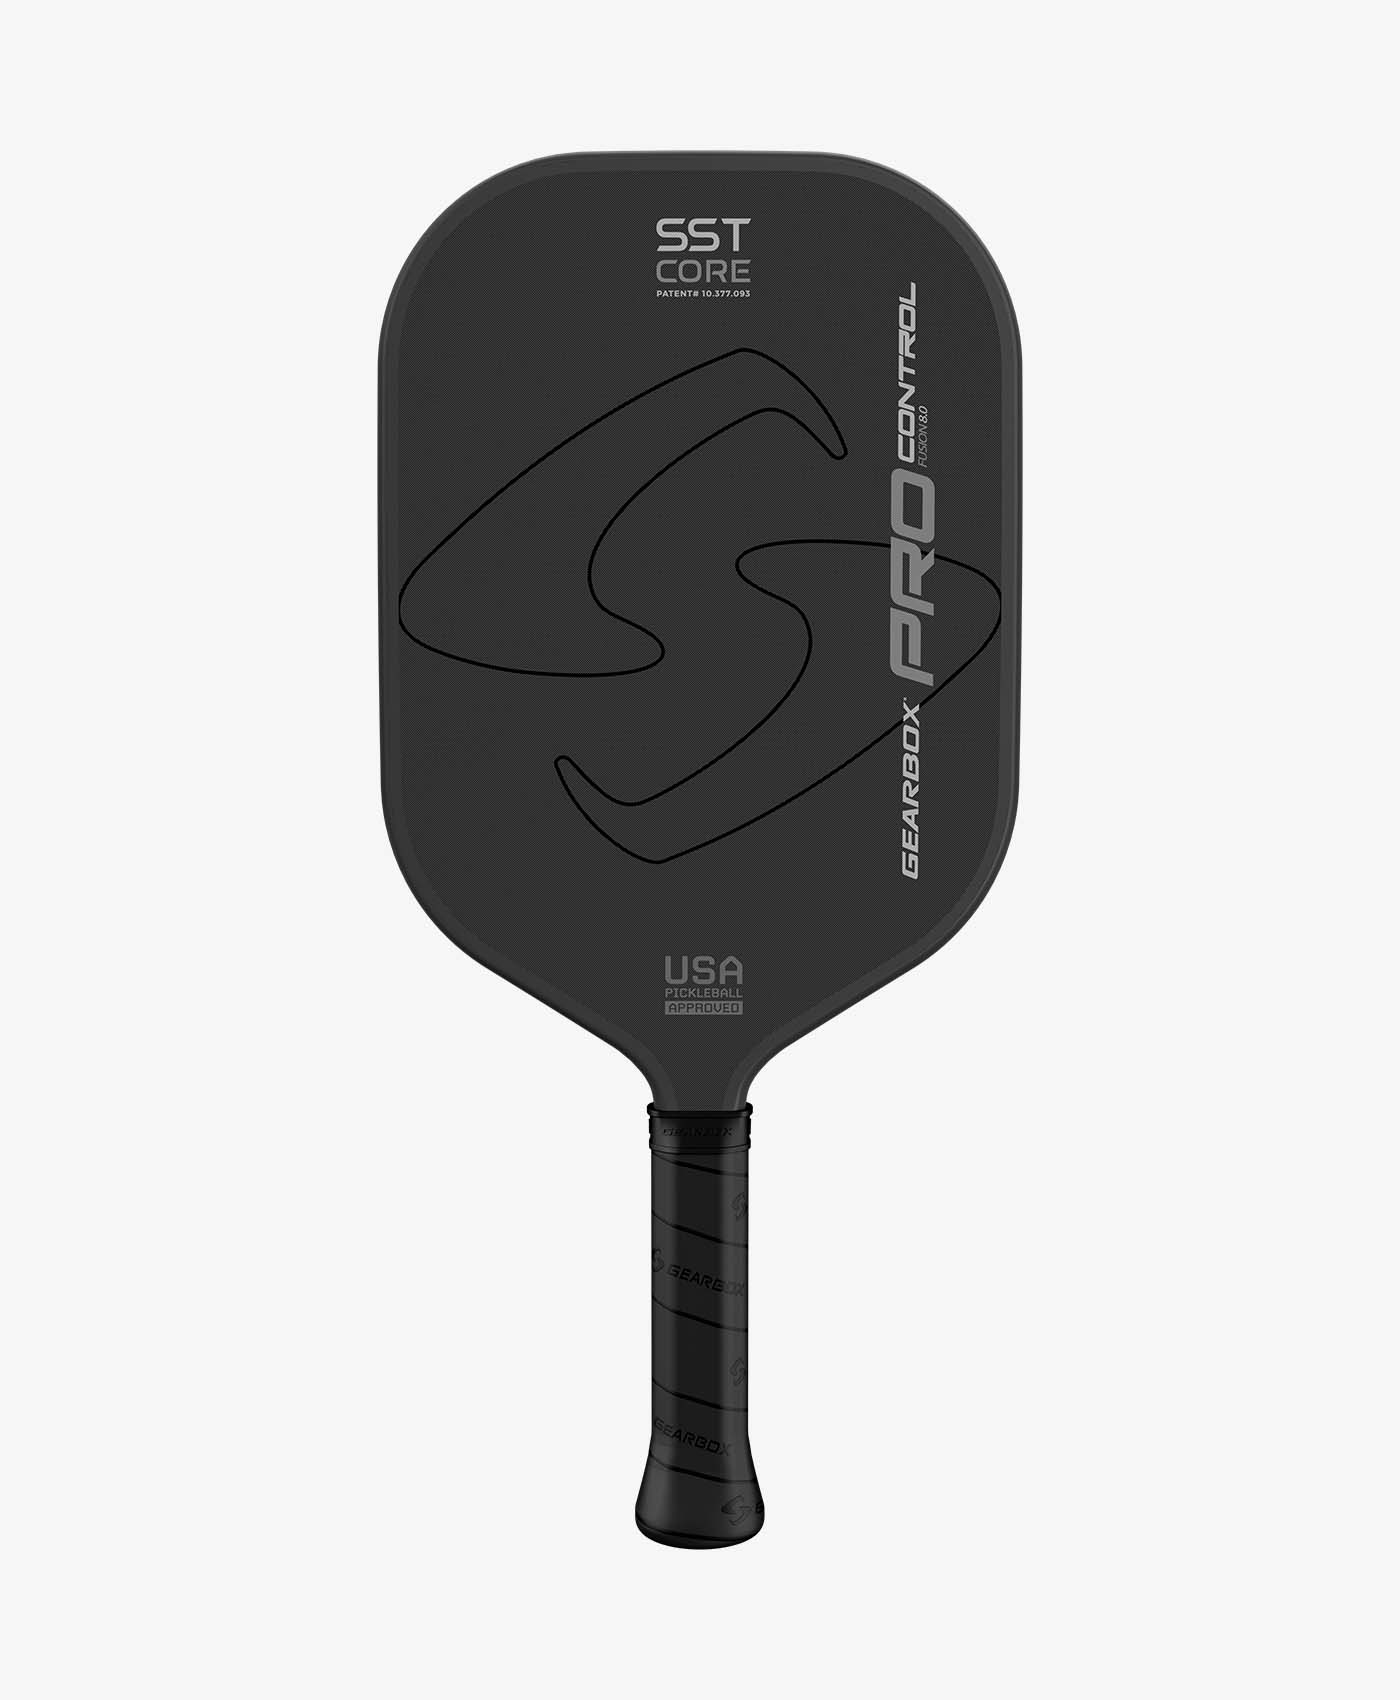 A Gearbox Pro Control Fusion Pickleball Paddle on a white background.